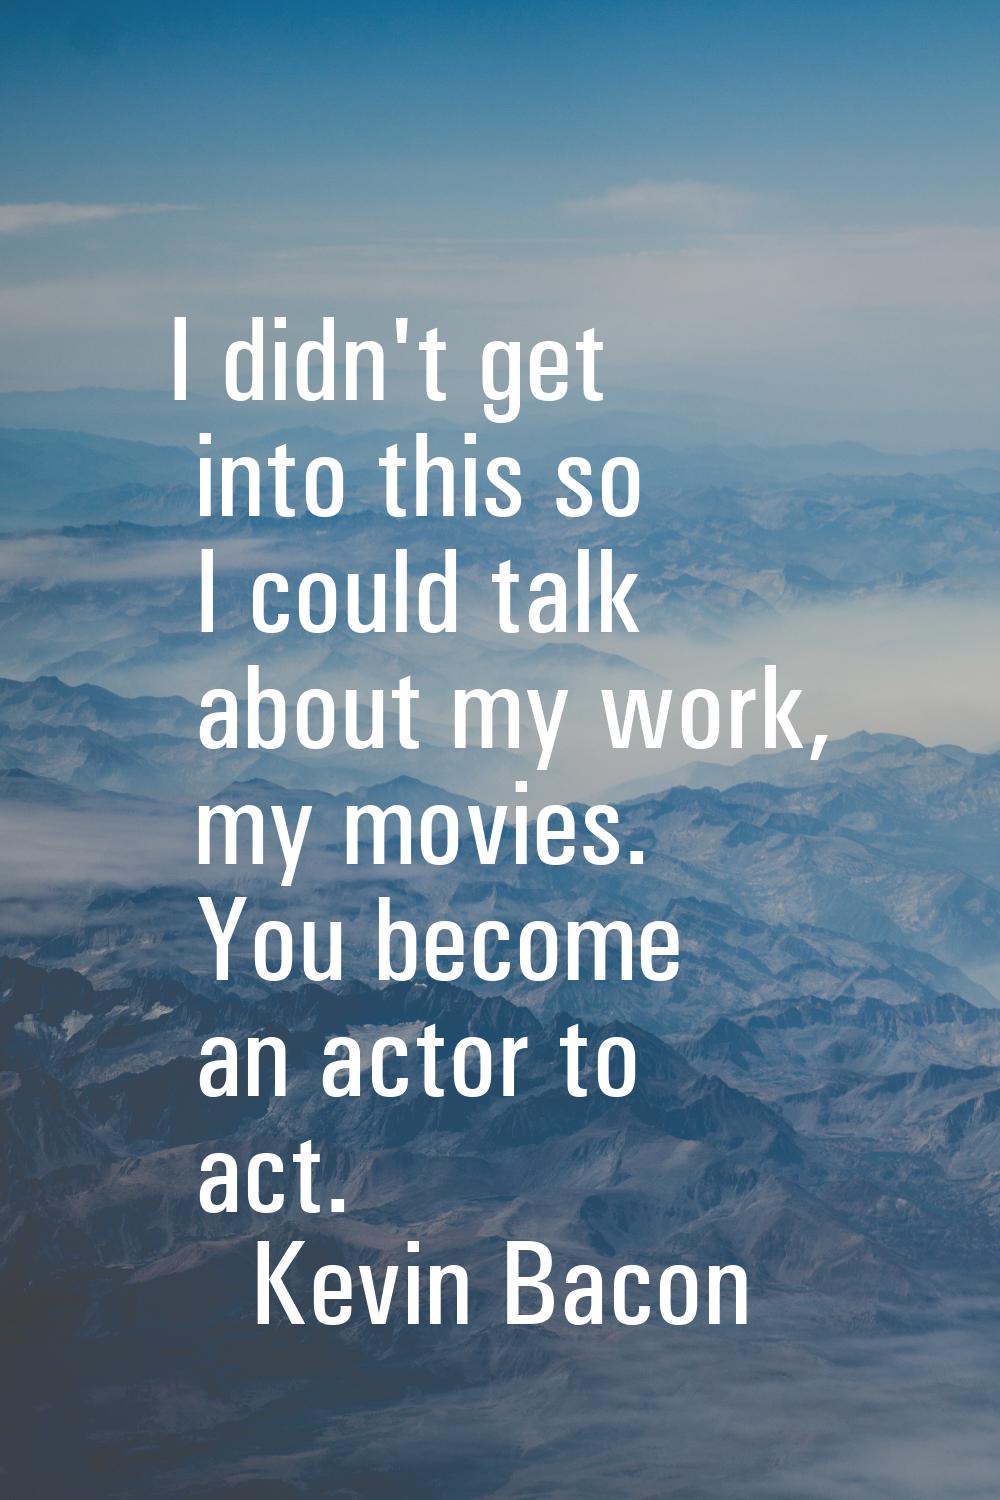 I didn't get into this so I could talk about my work, my movies. You become an actor to act.